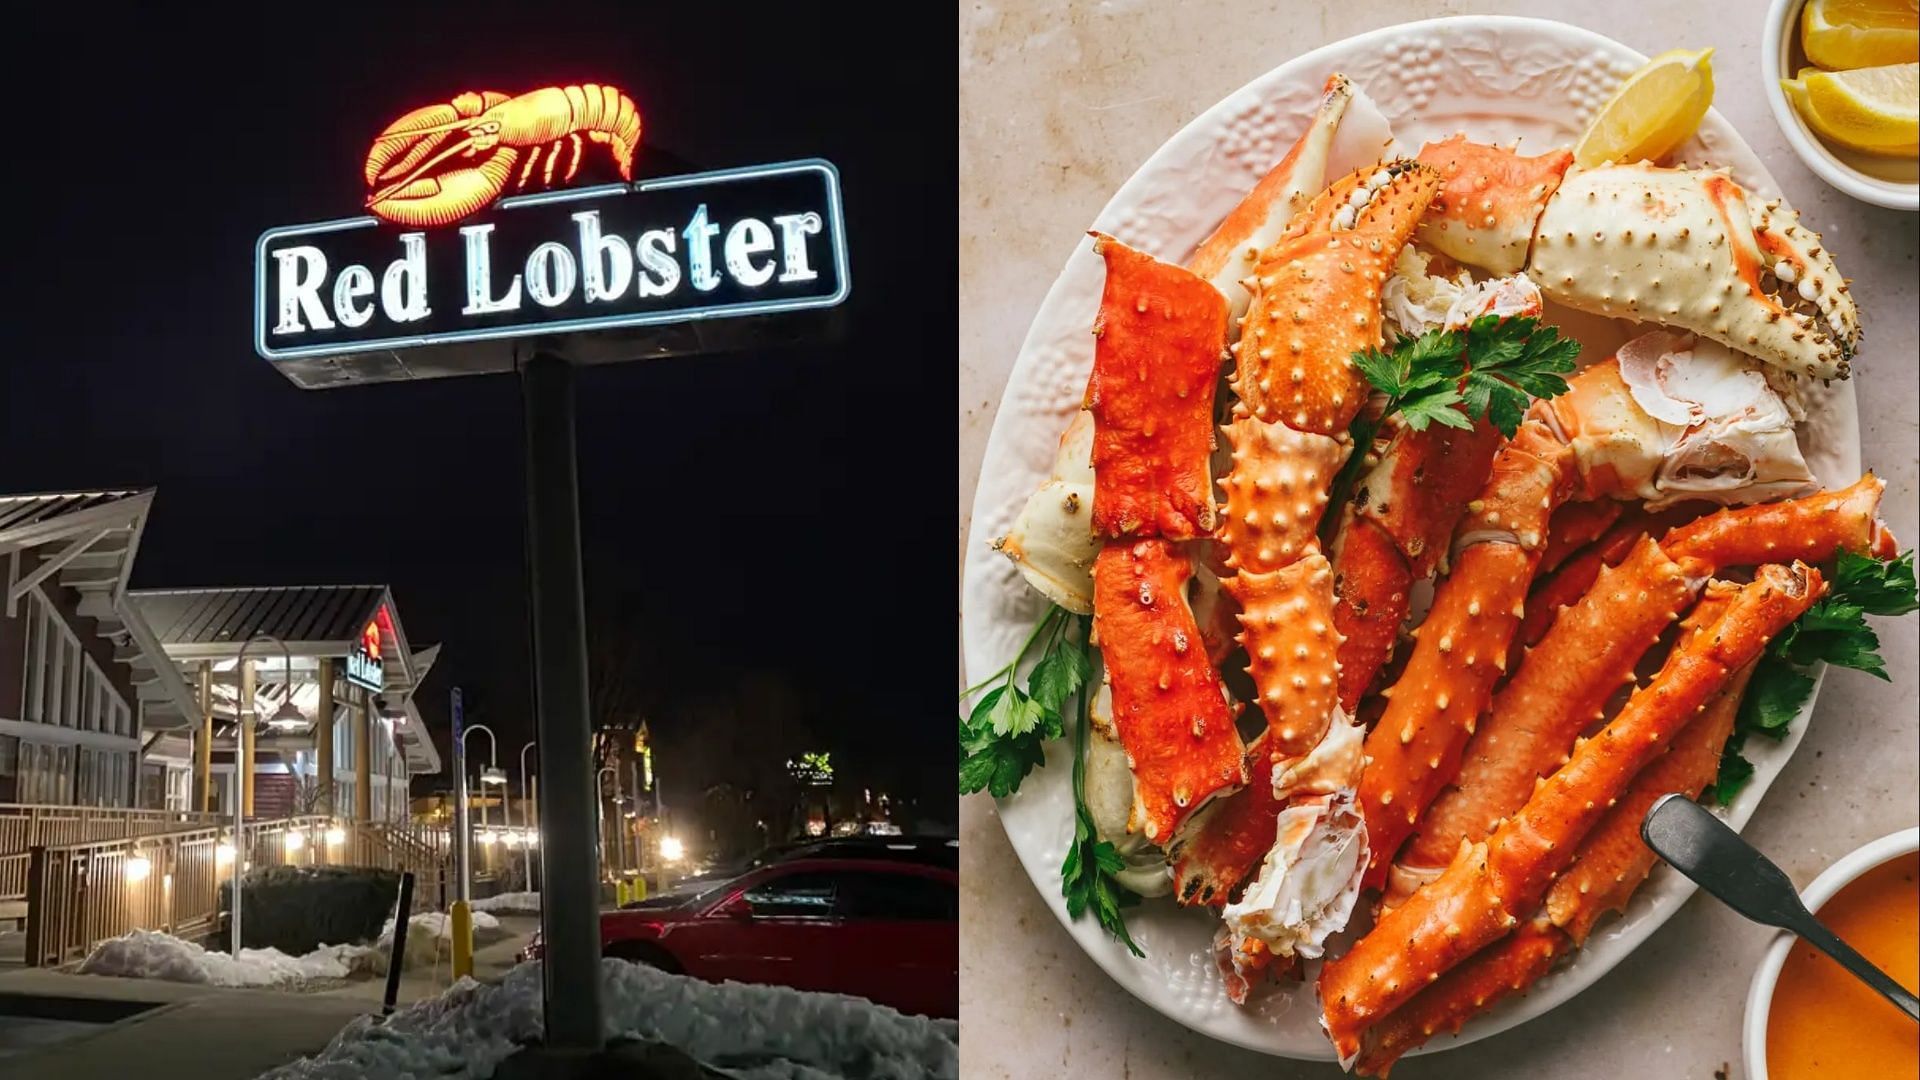 Red Lobster has brought back its Crabfest celebrations after four years. (Image via Laura Harkawik, Shutterstock)